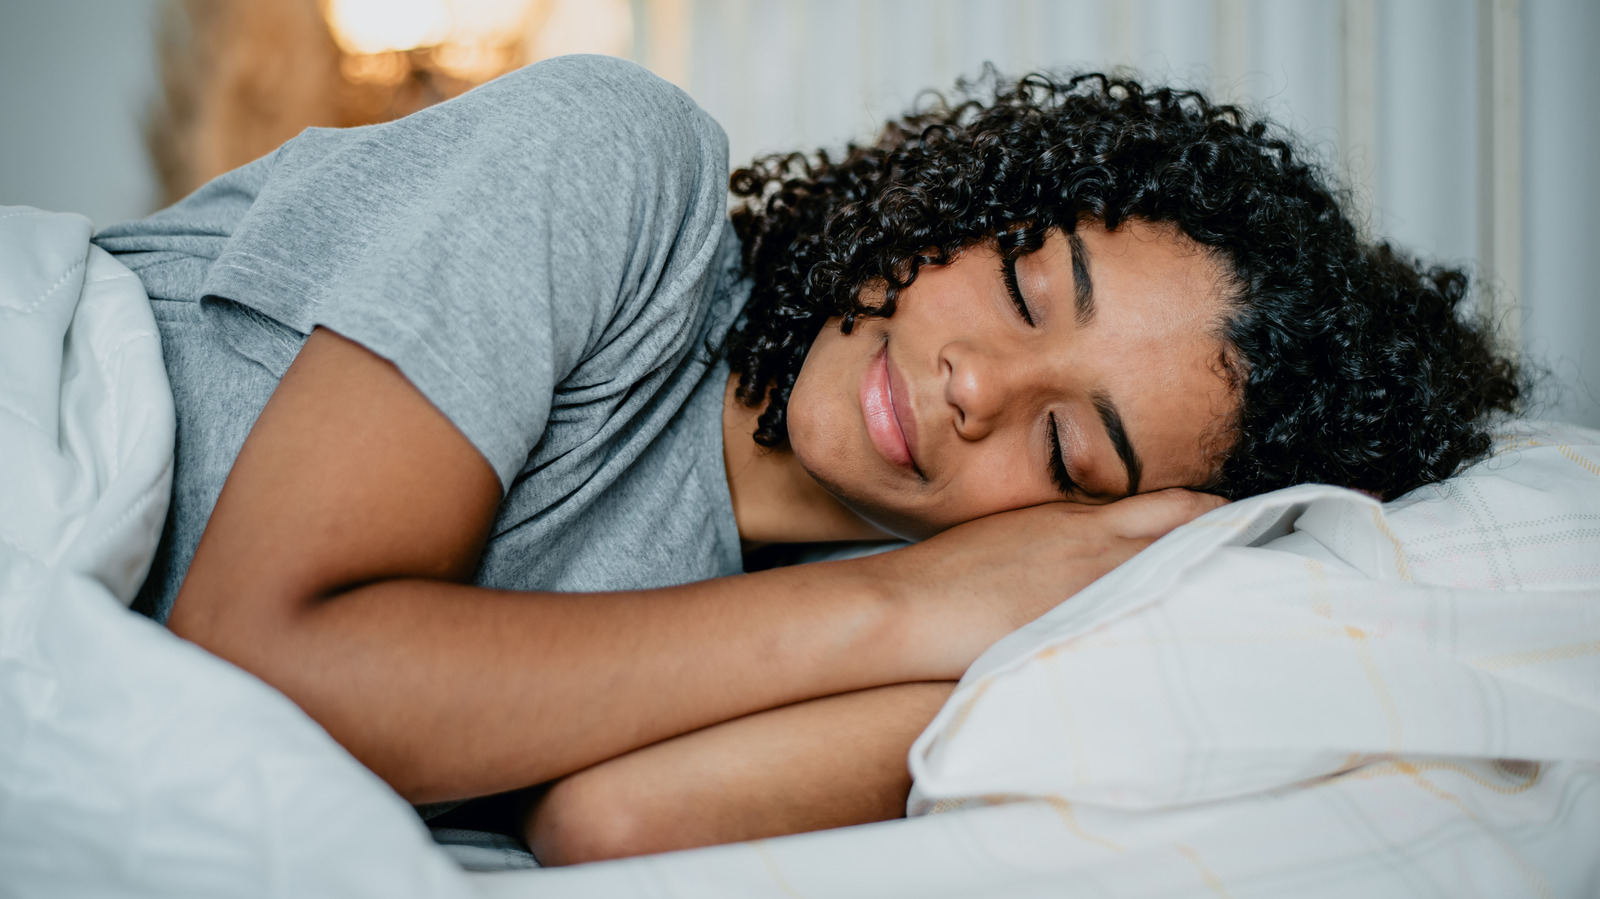 Try This Childhood Trick To Make Falling Asleep Easier – Health Digest